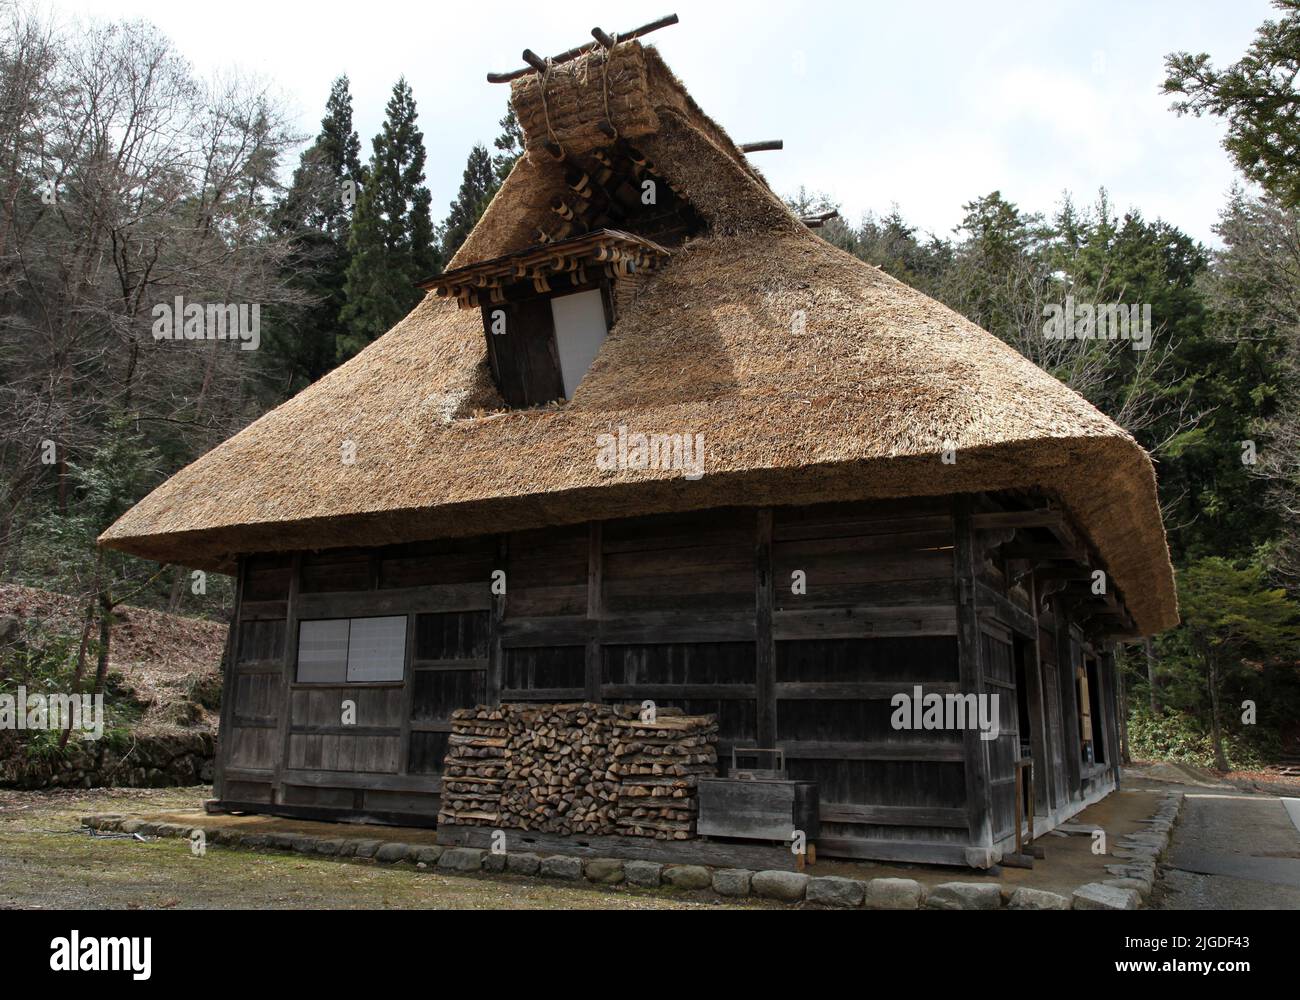 Traditional thatched wooden hut in Takayama Japan. Stock Photo